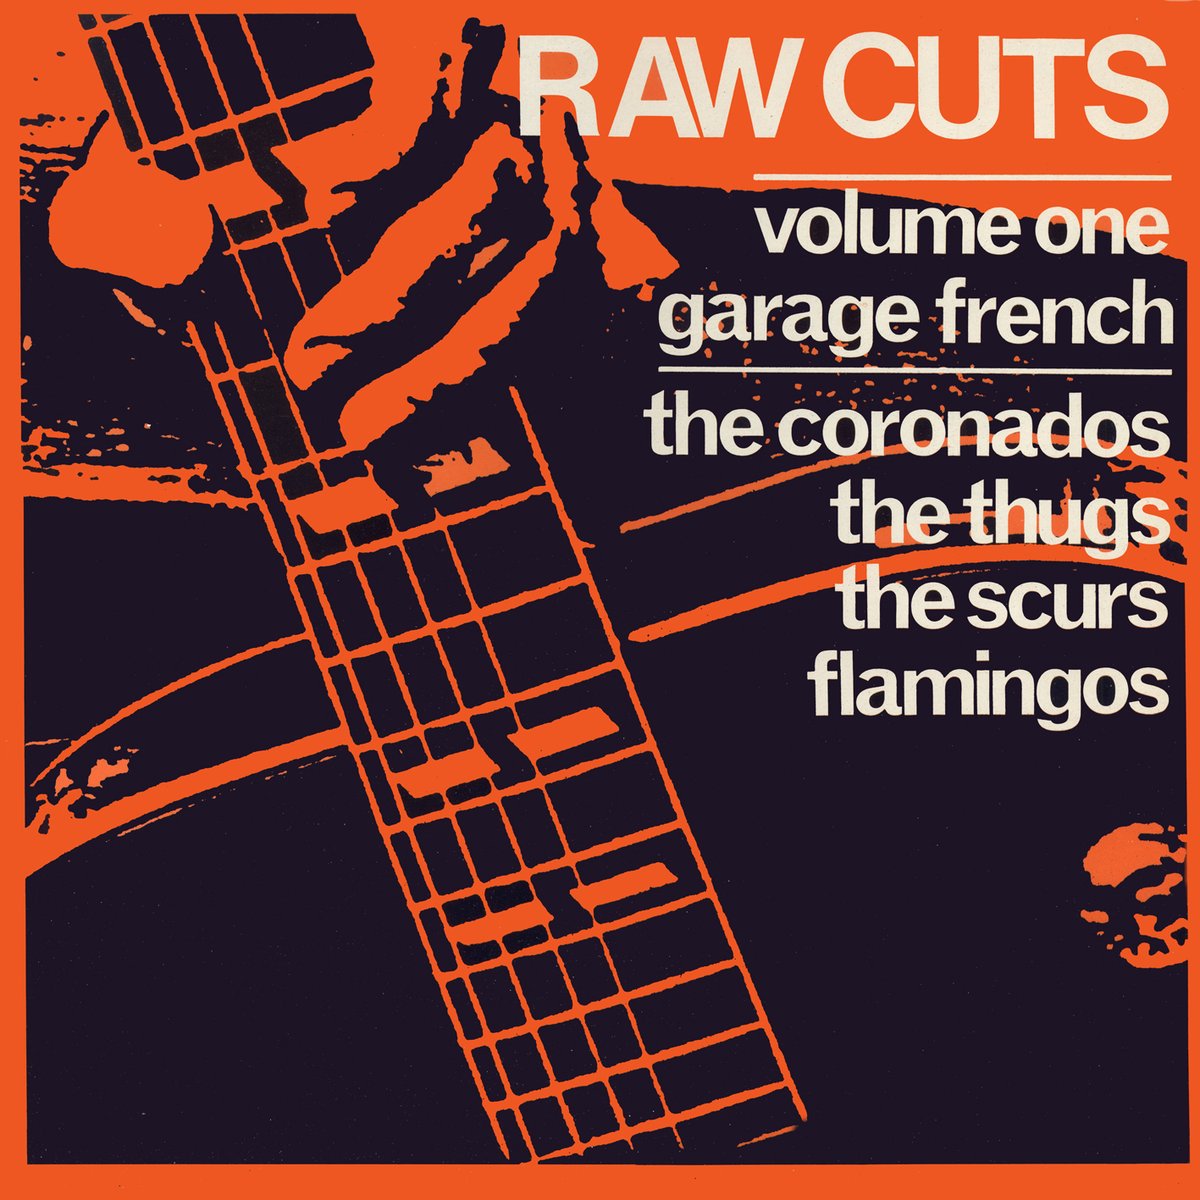 Various – Raw Cuts Volume One - Garage French, 80's Psych Beat Music Album Compilation 80's Garage revival straight from France! Enjoy : sunnyboy66.com/various-raw-cu… #sunnyboy66 #garagerock #garagerockrevival #garagepunk #garagepunkrevival #80sgarage #80sgaragerock #80sgaragepunk